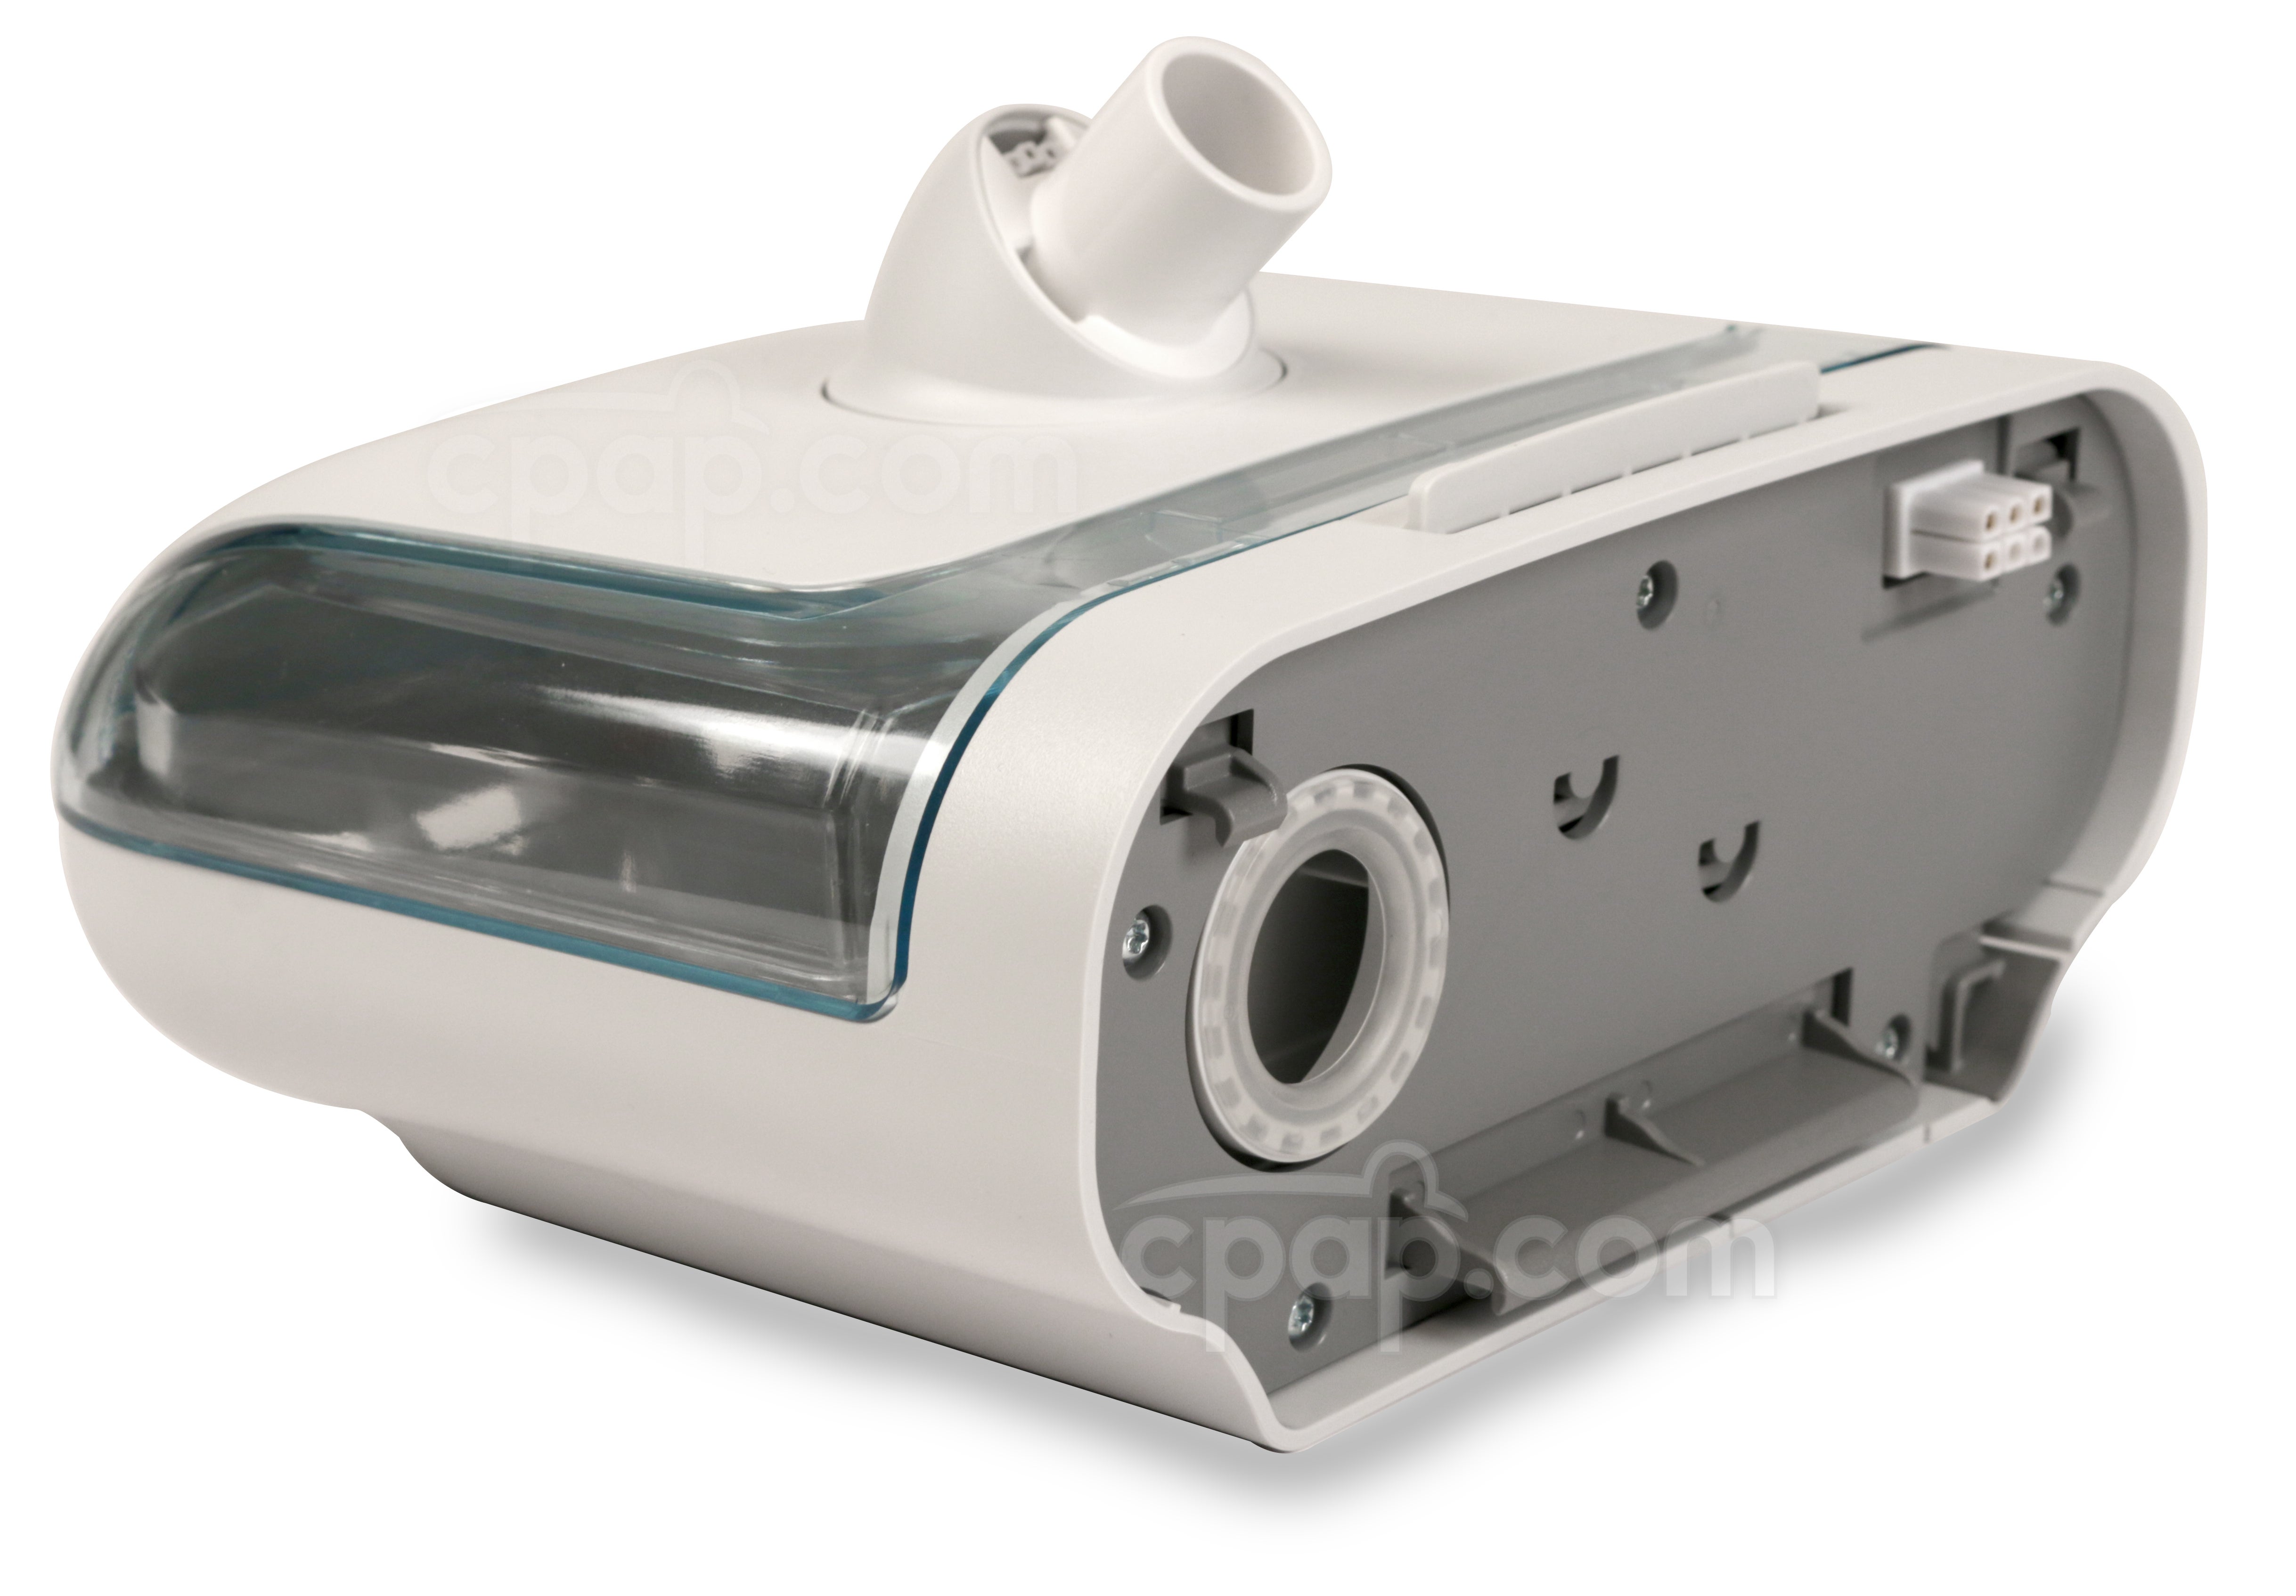 Humidificador CPAP System One